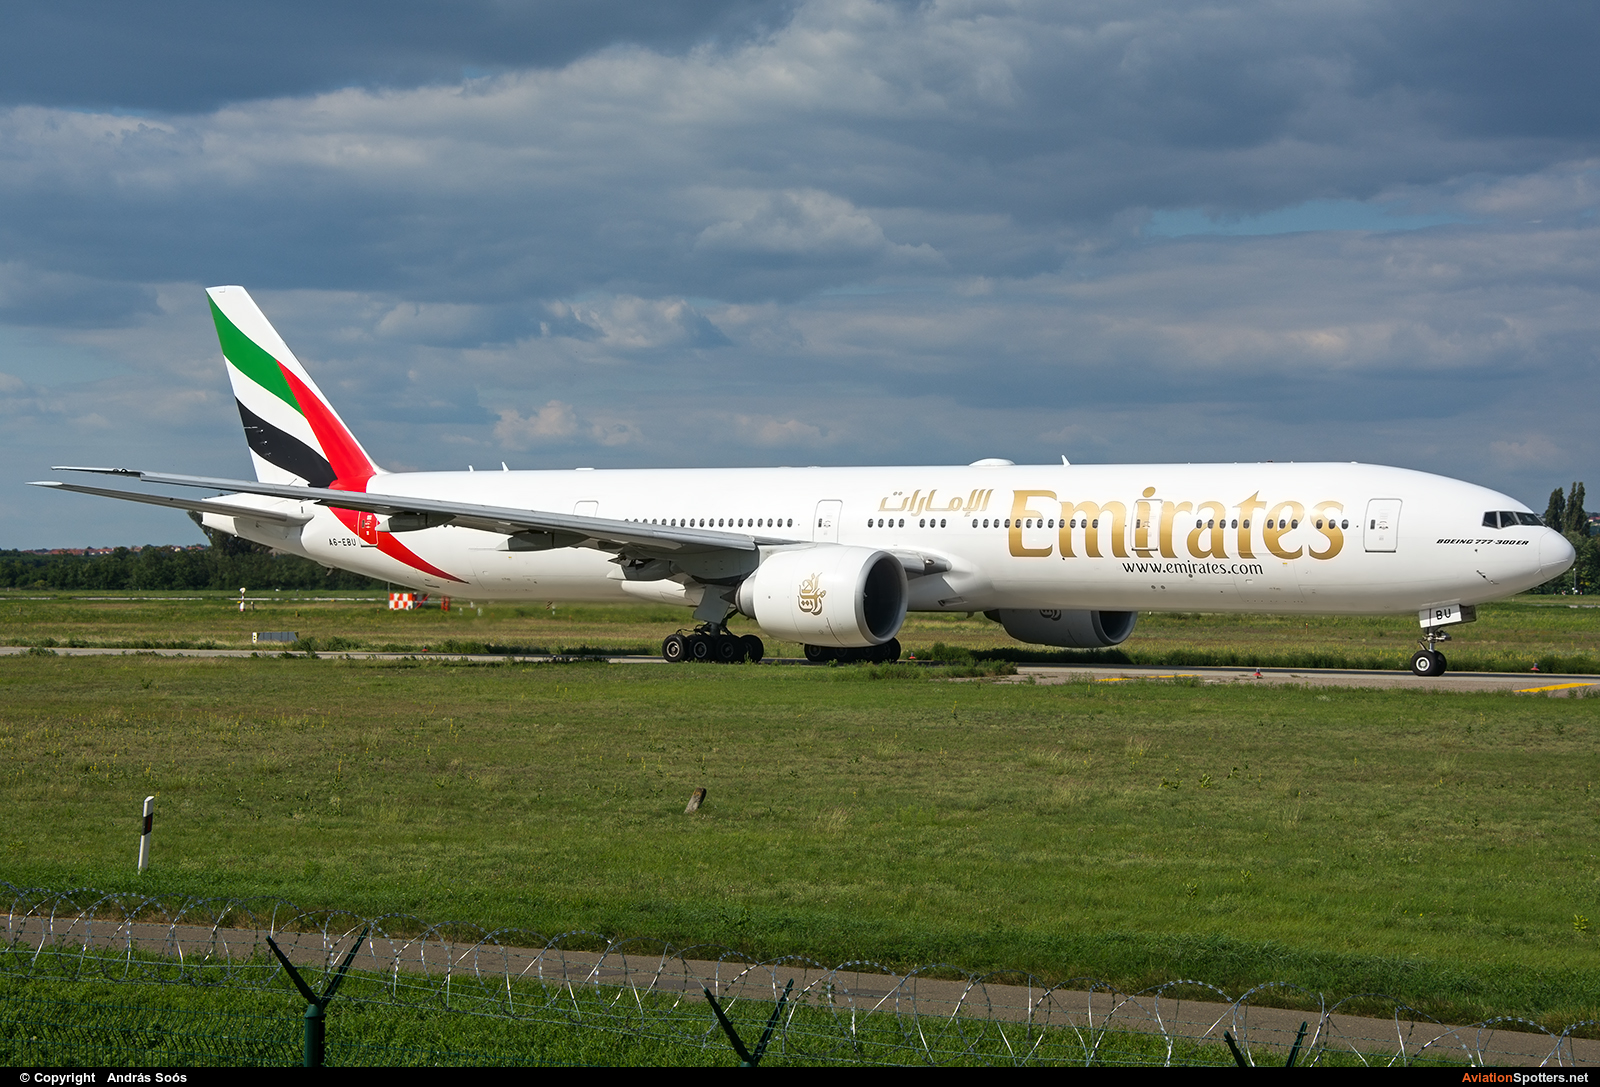 Emirates Airlines  -  777-300  (A6-EBU) By András Soós (sas1965)